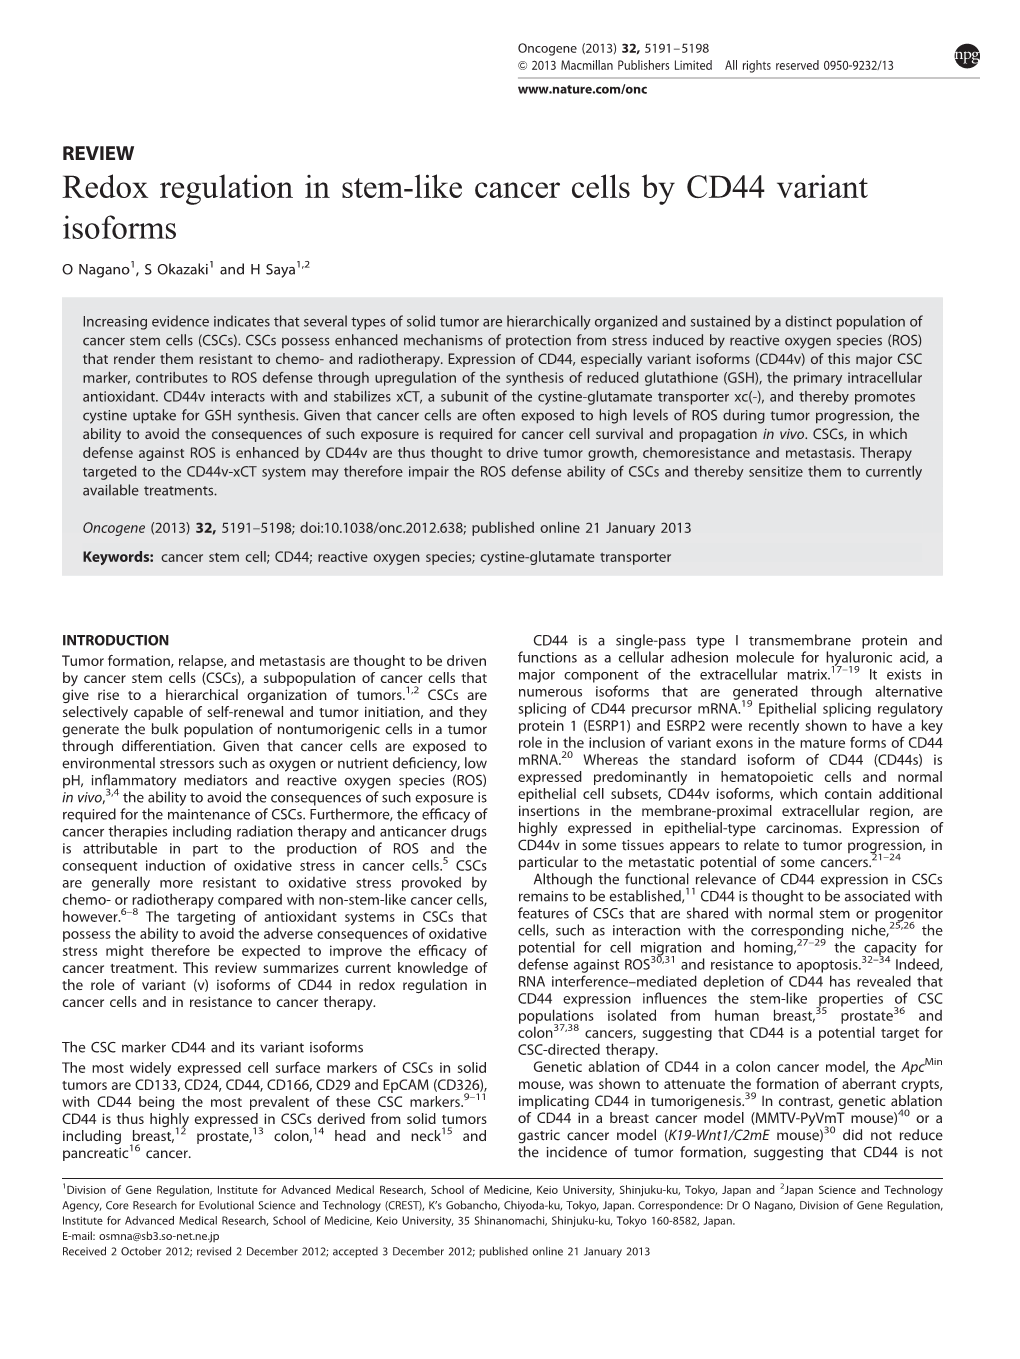 Redox Regulation in Stem-Like Cancer Cells by CD44 Variant Isoforms